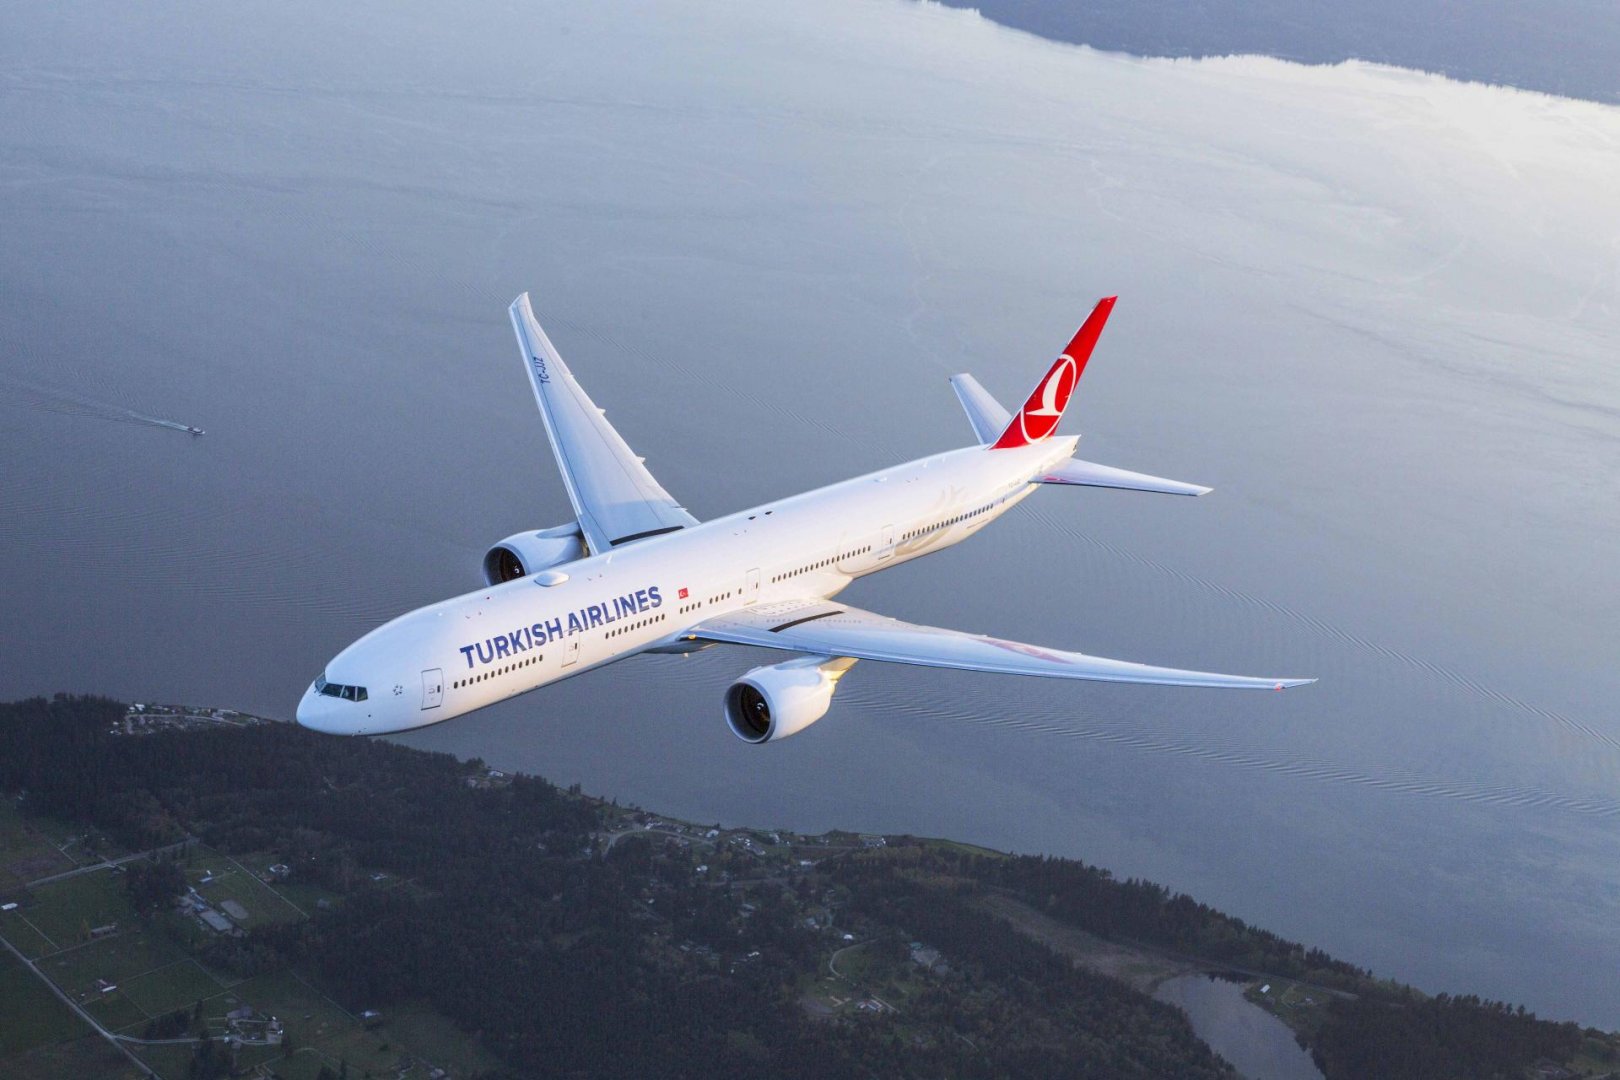 Turkish Airlines make order to purchase new planes